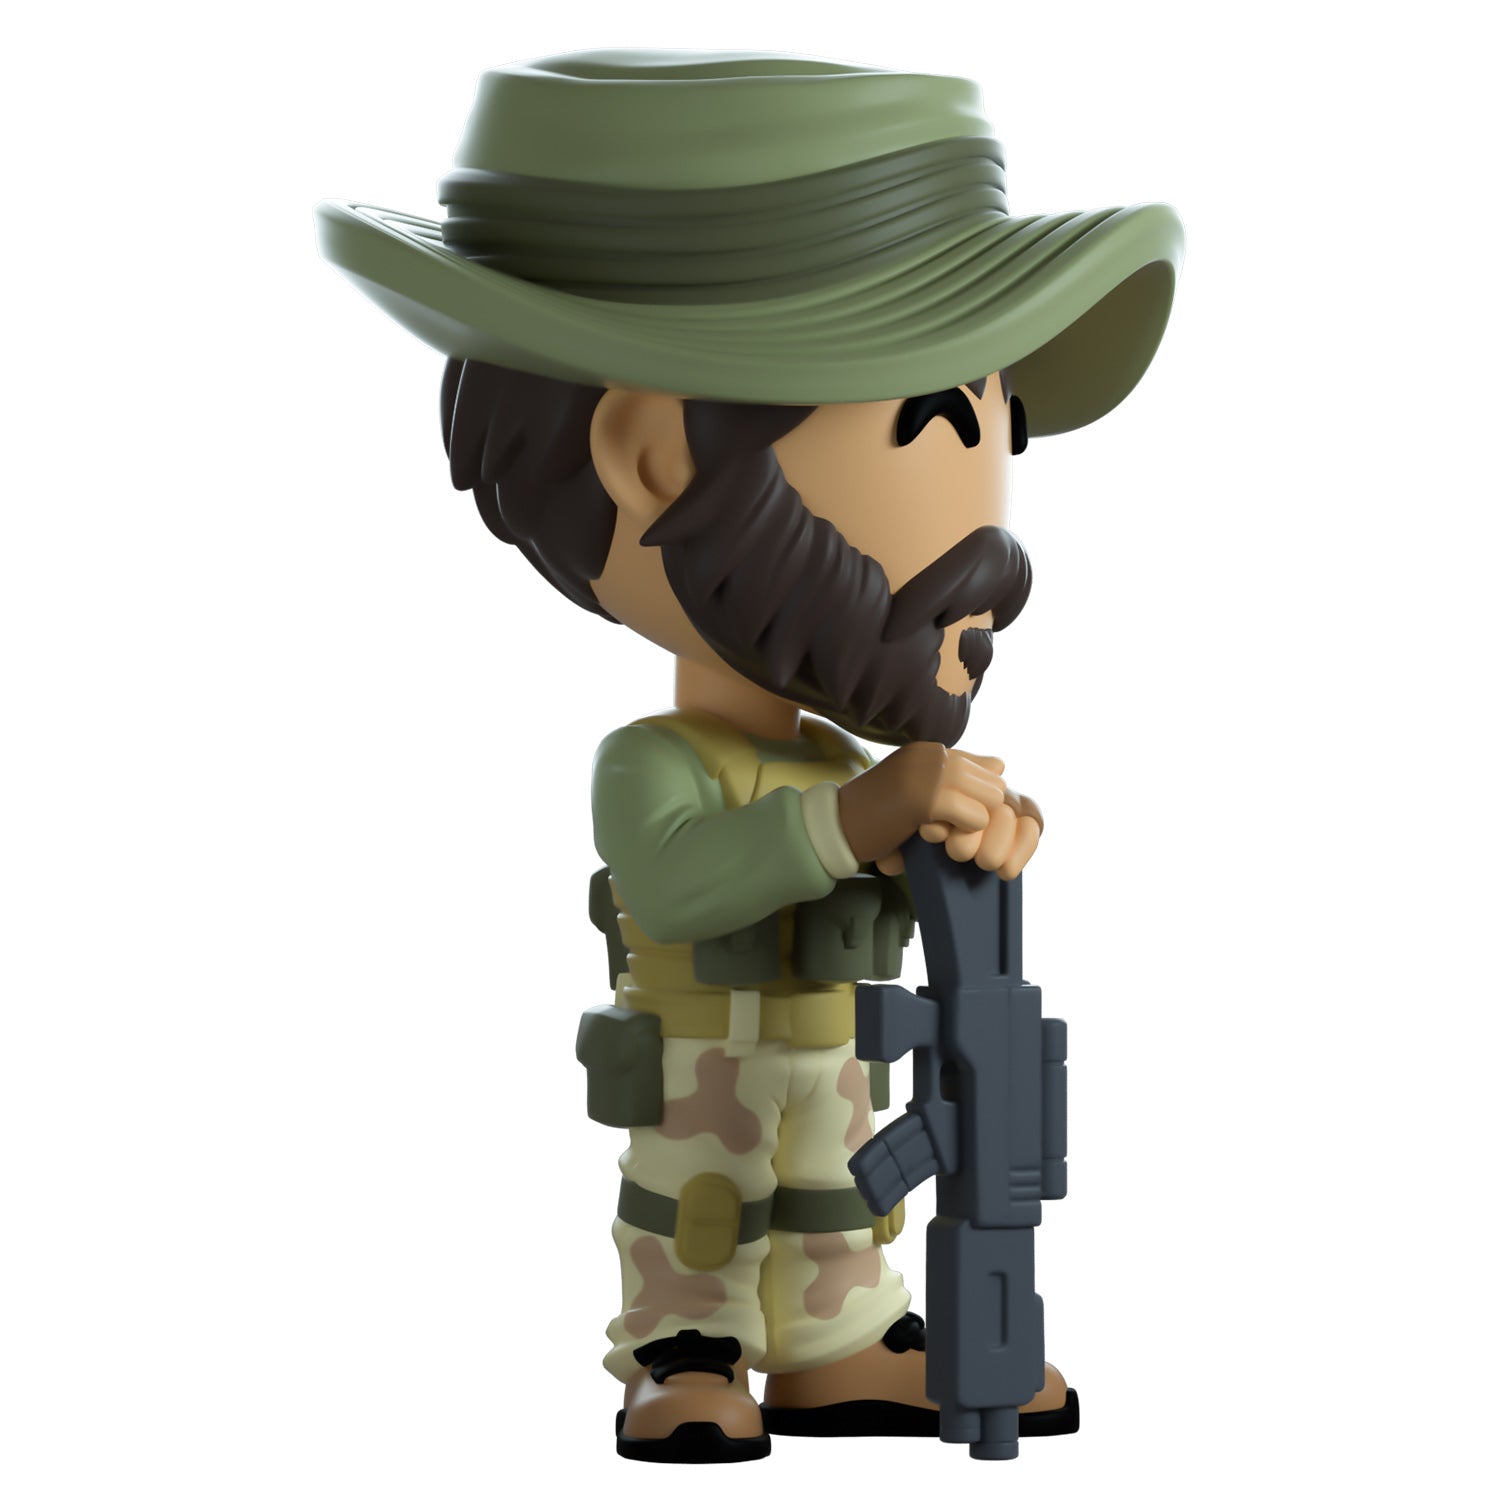 Call of Duty Captain Price Youtooz Figurine - Side View